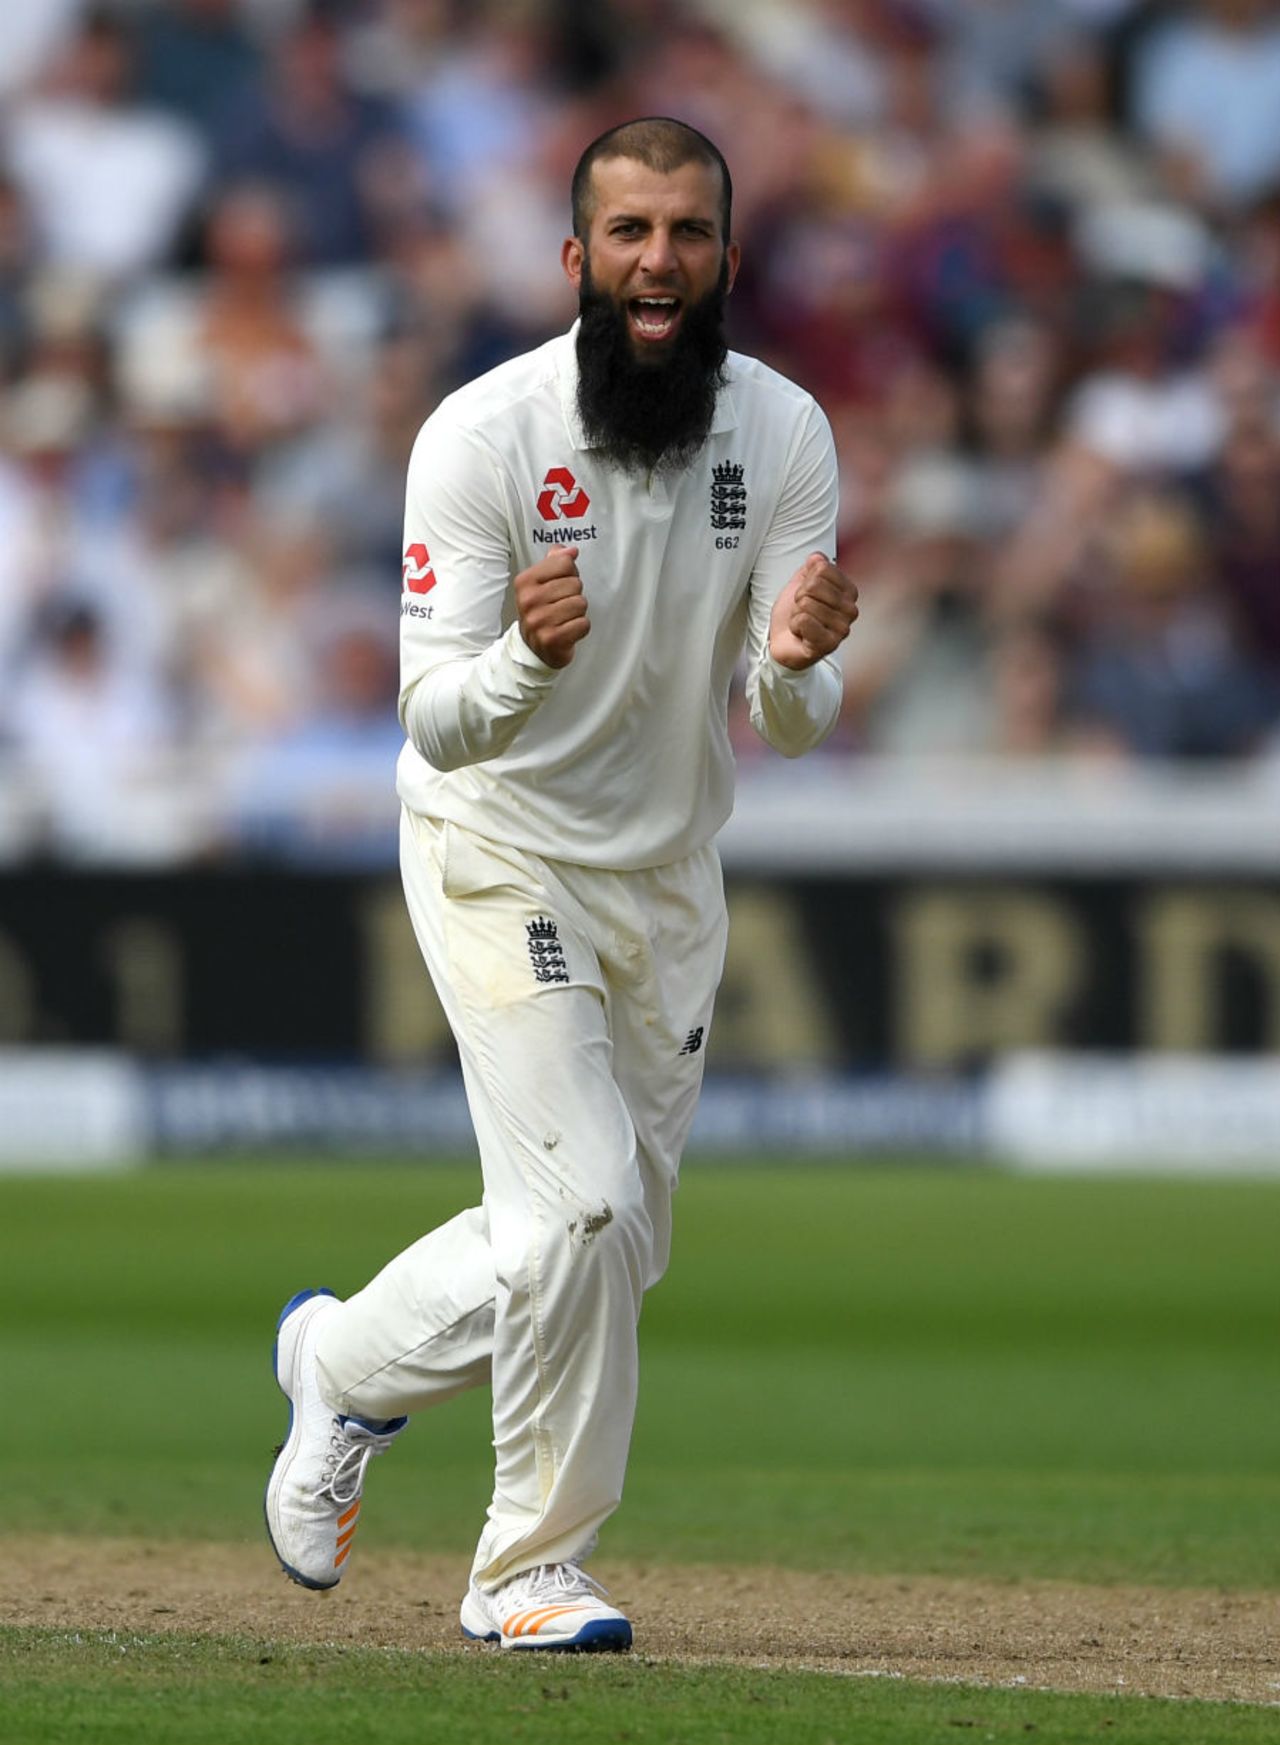 Moeen Ali claimed the wicket of Temba Bavuma before the new ball was due, England v South Africa, 2nd Investec Test, Trent Bridge, 3rd day, July 16, 2017